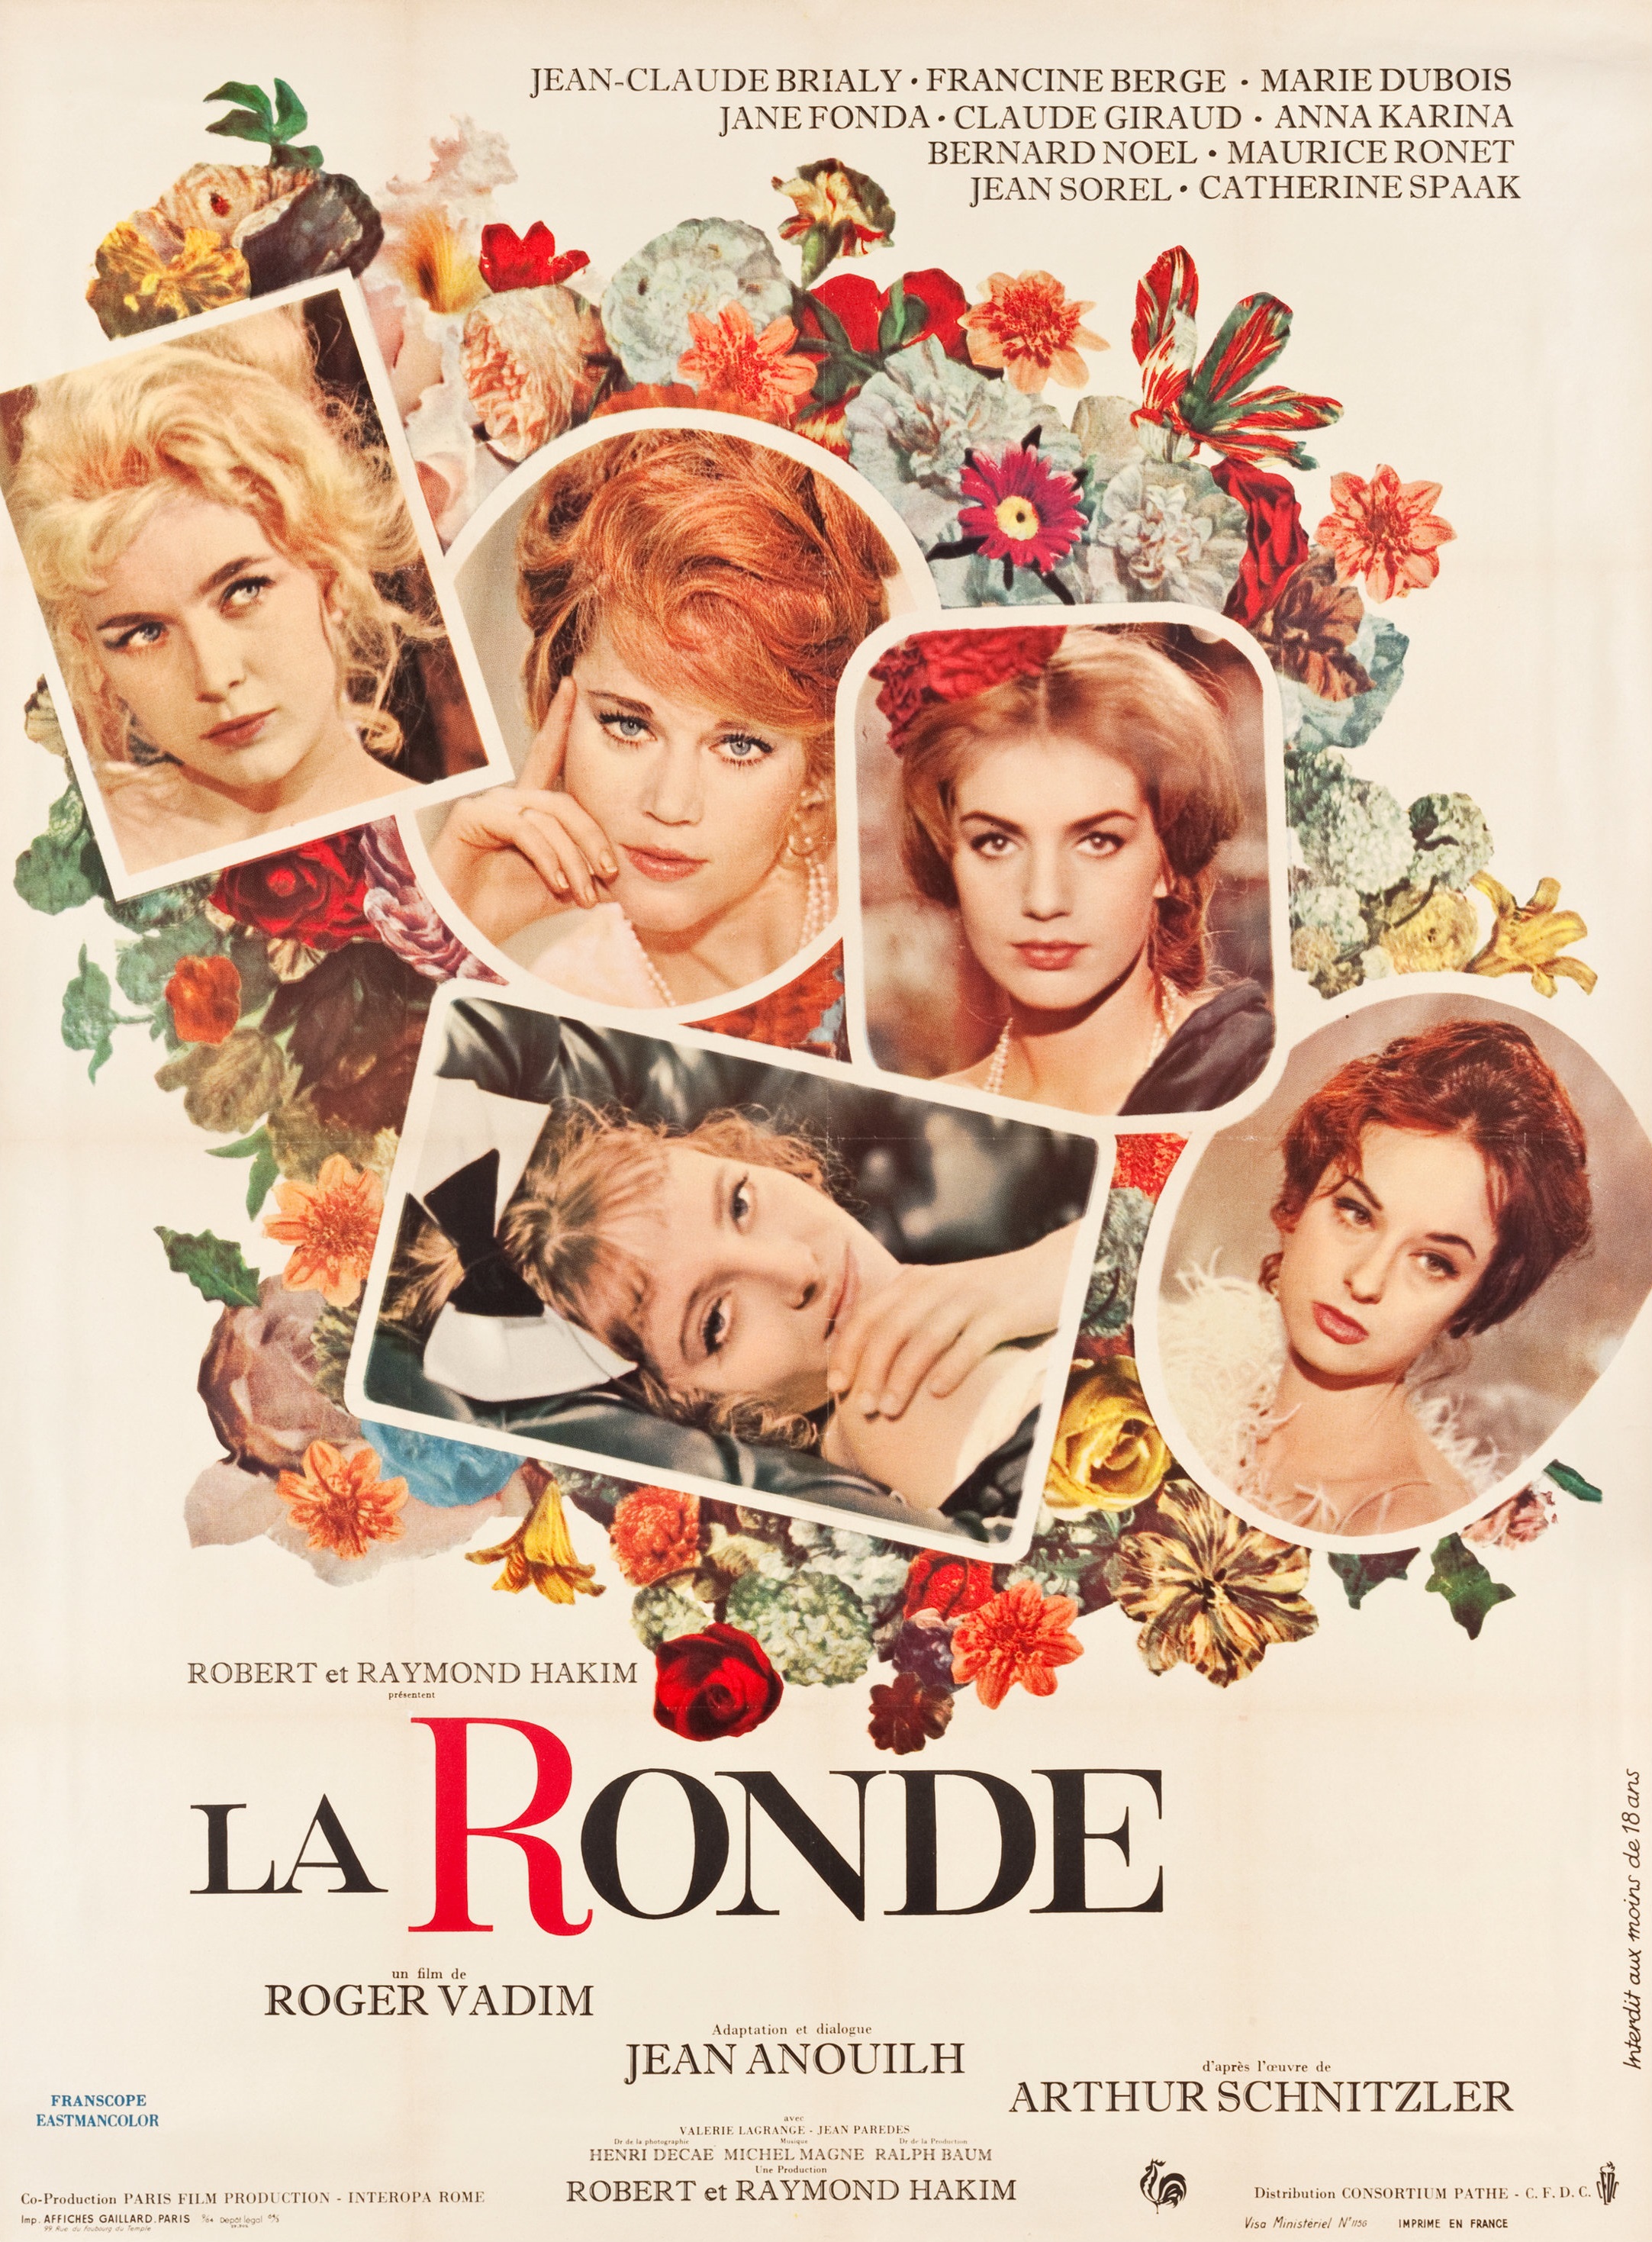 La ronde (1964) with English Subtitles on DVD on DVD